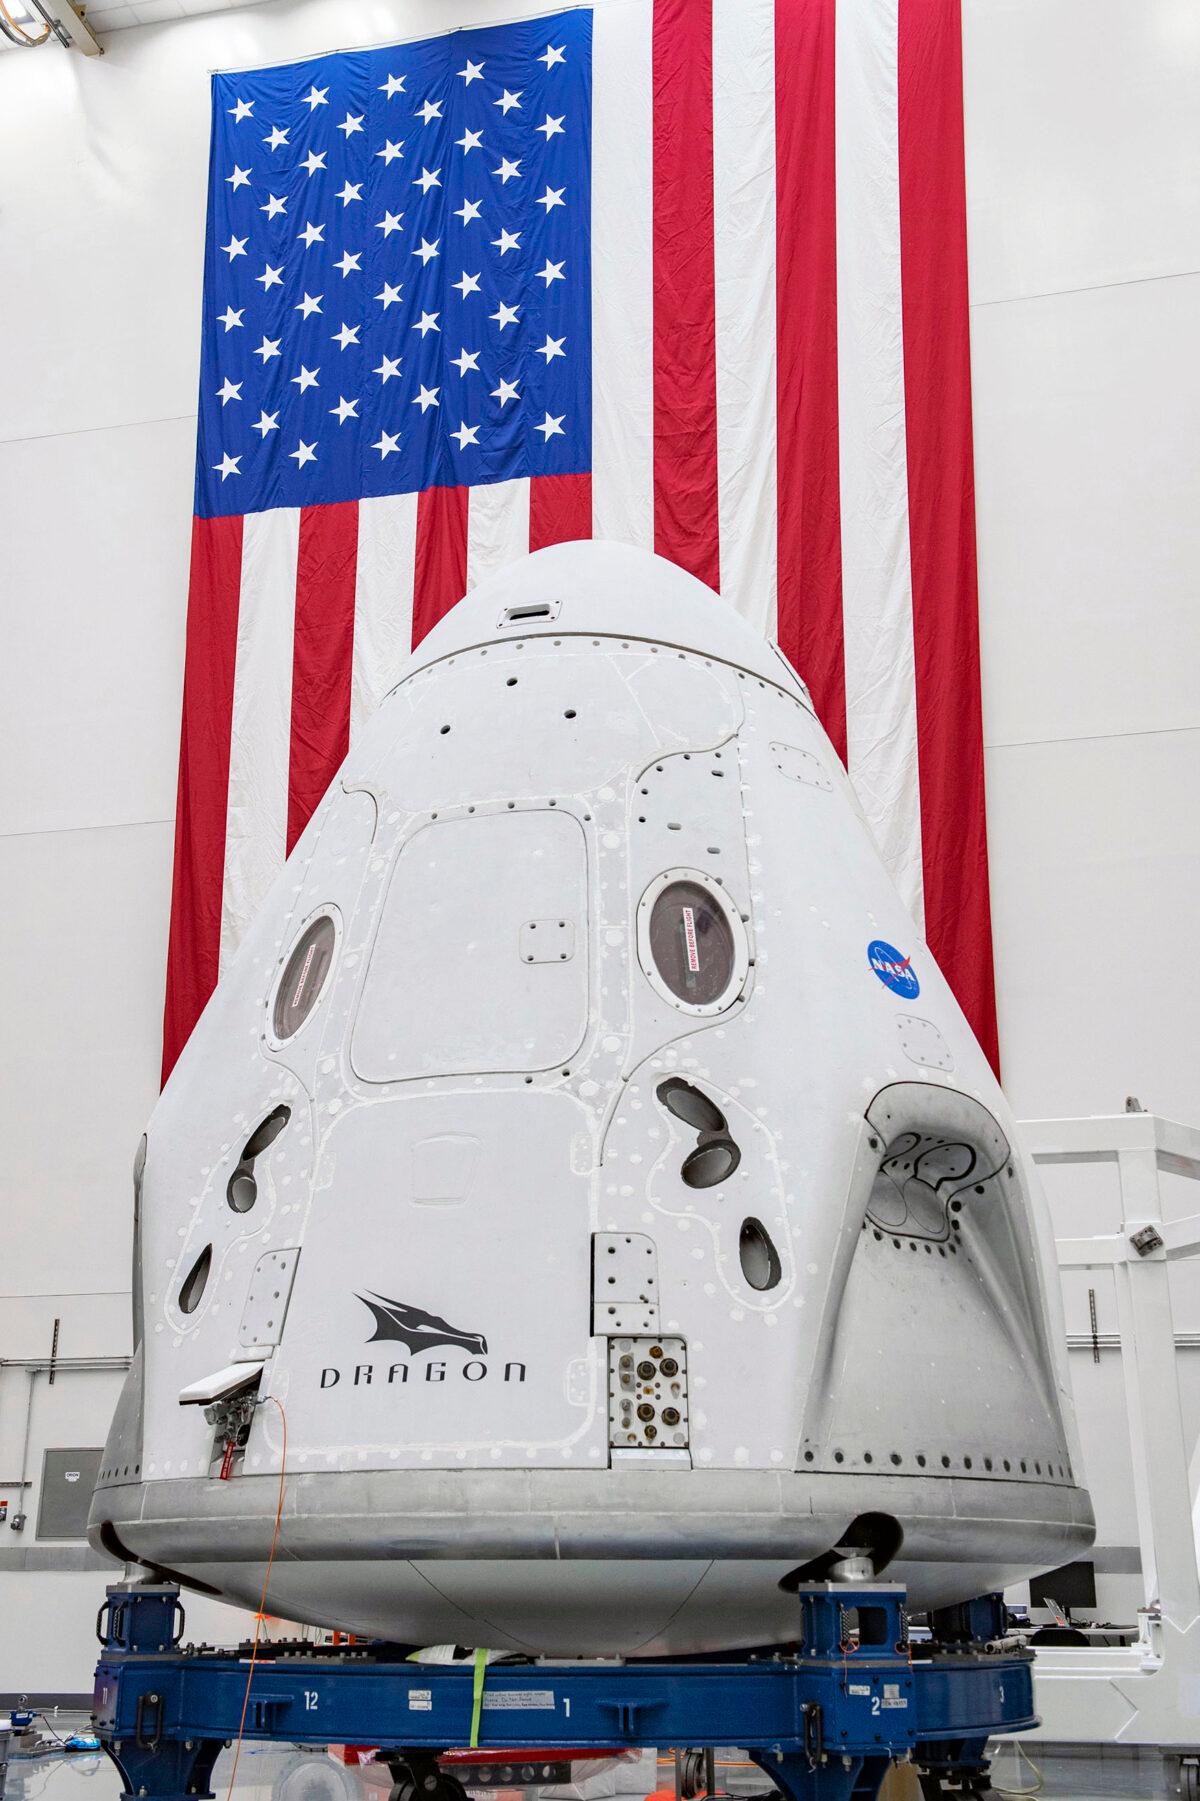 The SpaceX Crew Dragon spacecraft undergoes final processing at Cape Canaveral Air Force Station, Fla., on April 10, 2020. (SpaceX via AP)